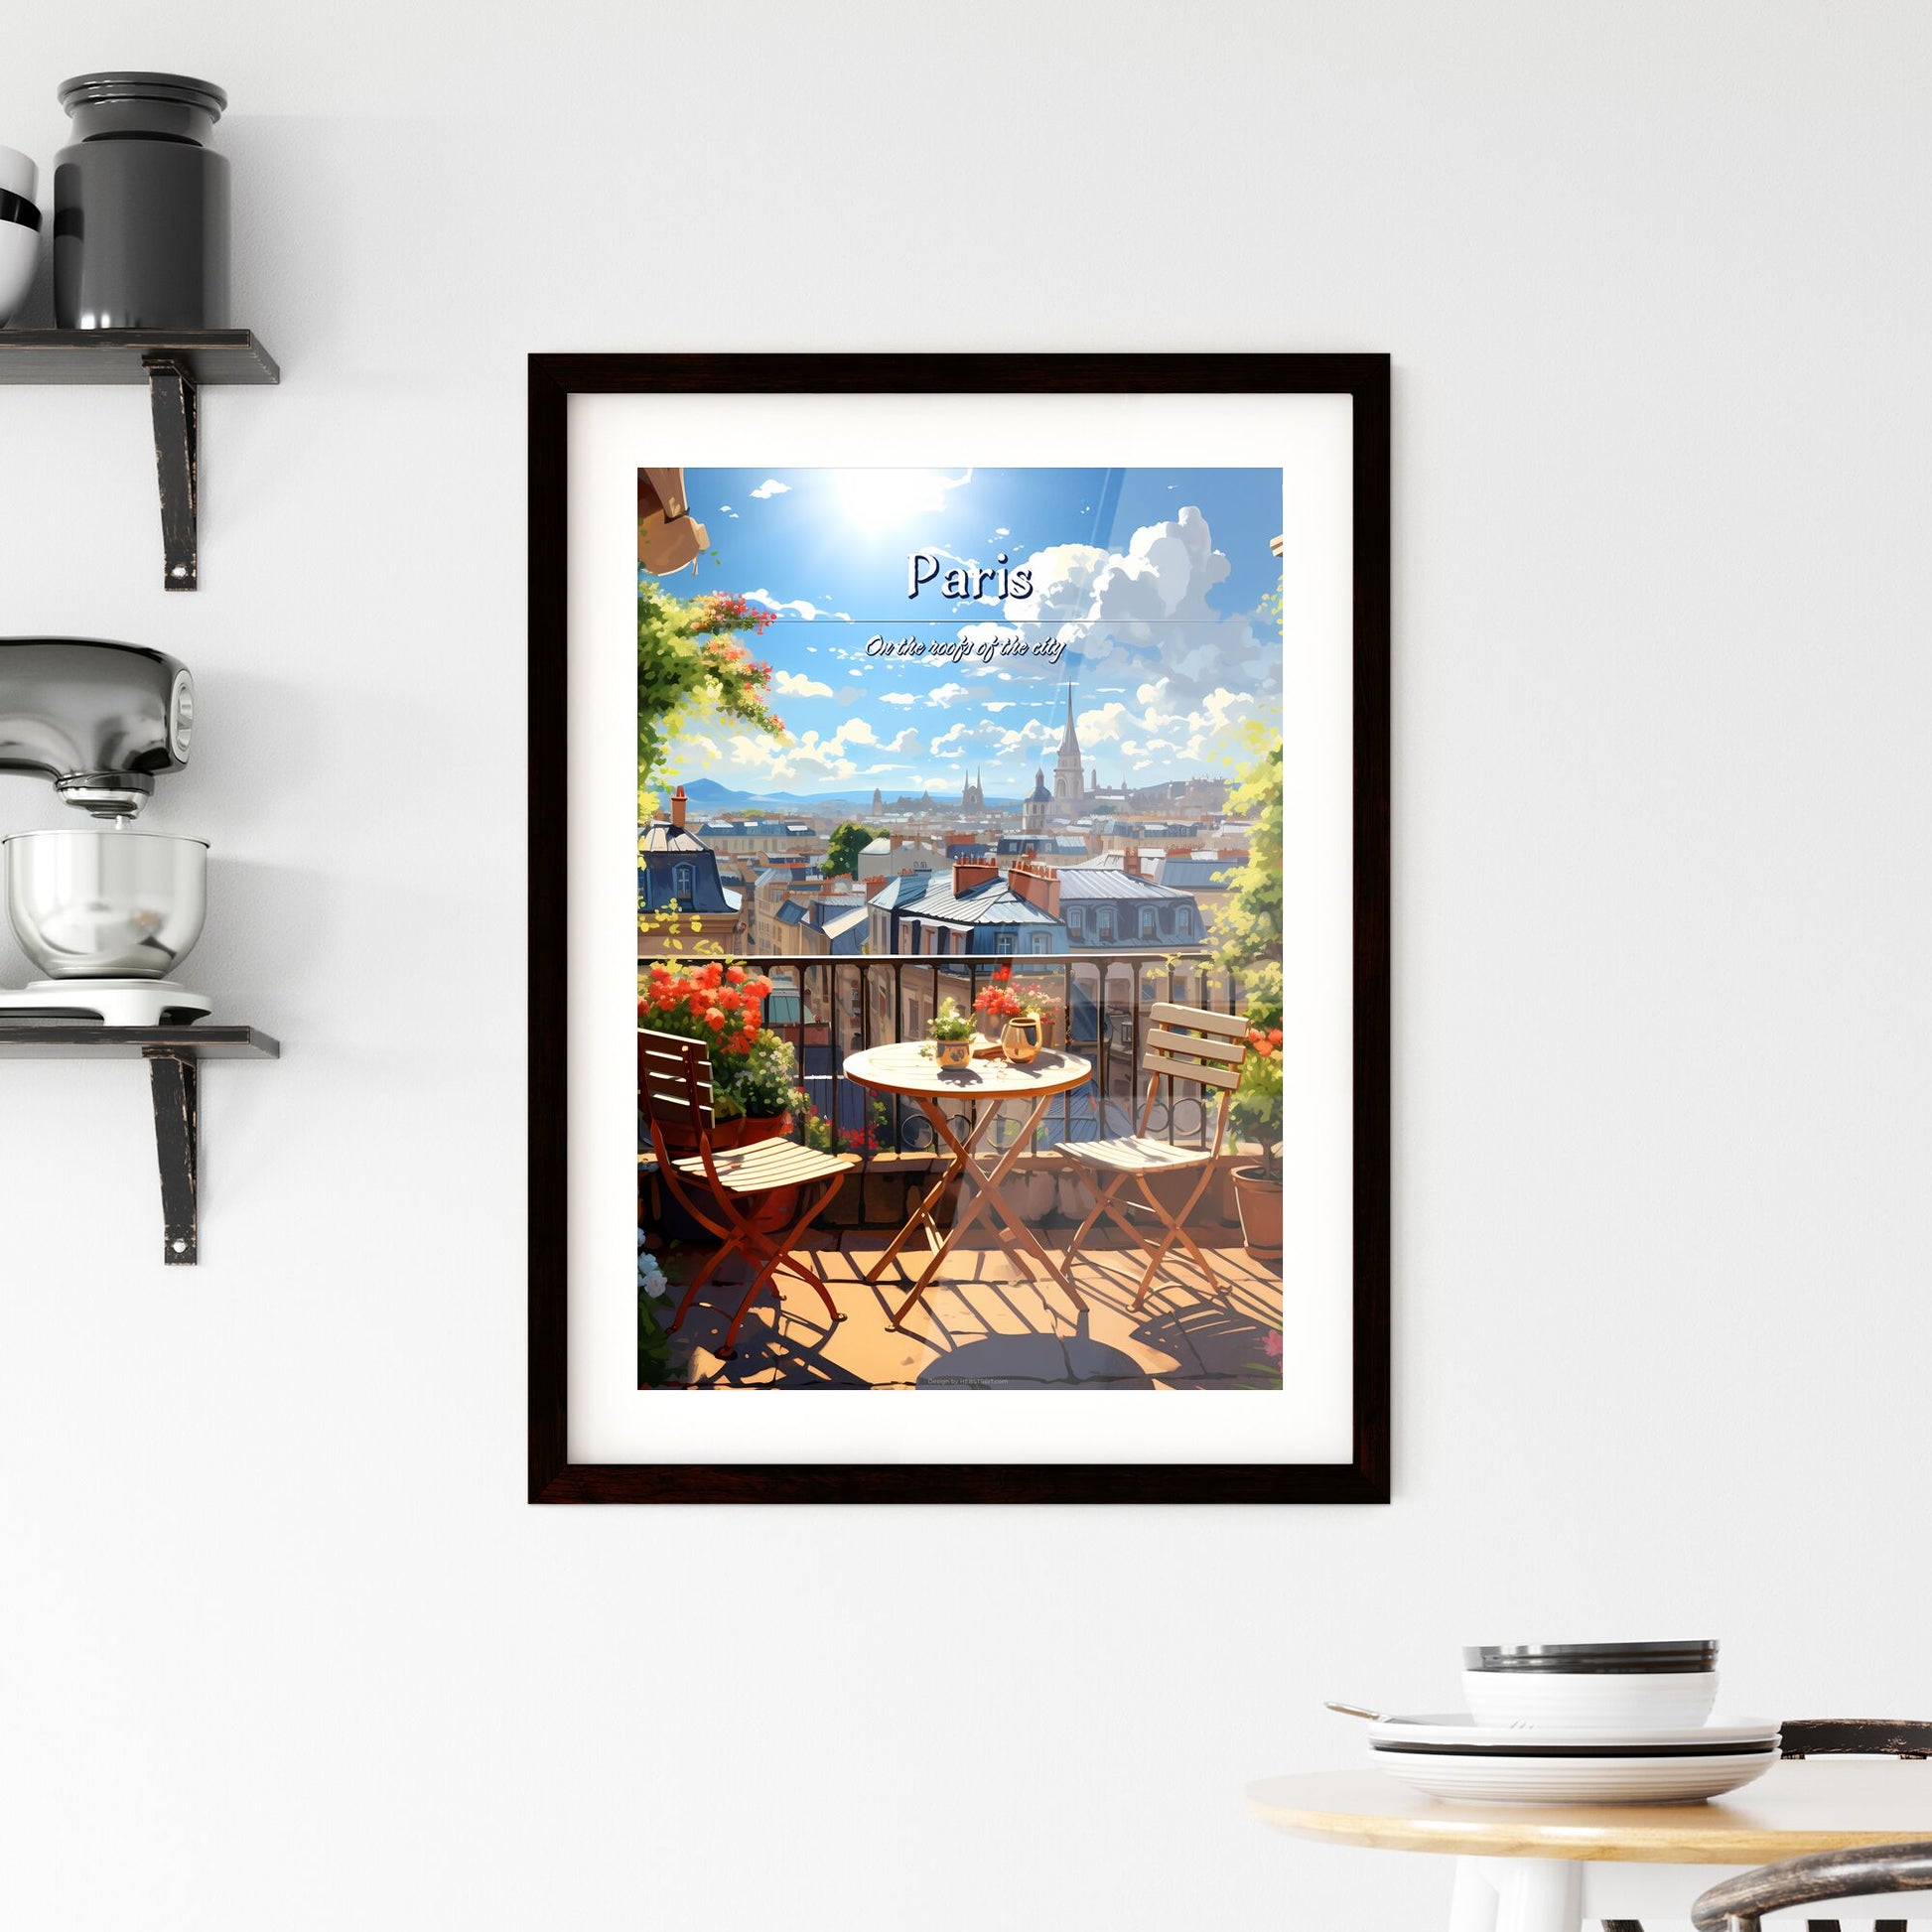 On the roofs of Paris - Art print of a balcony with a table and chairs and a view of a city Default Title